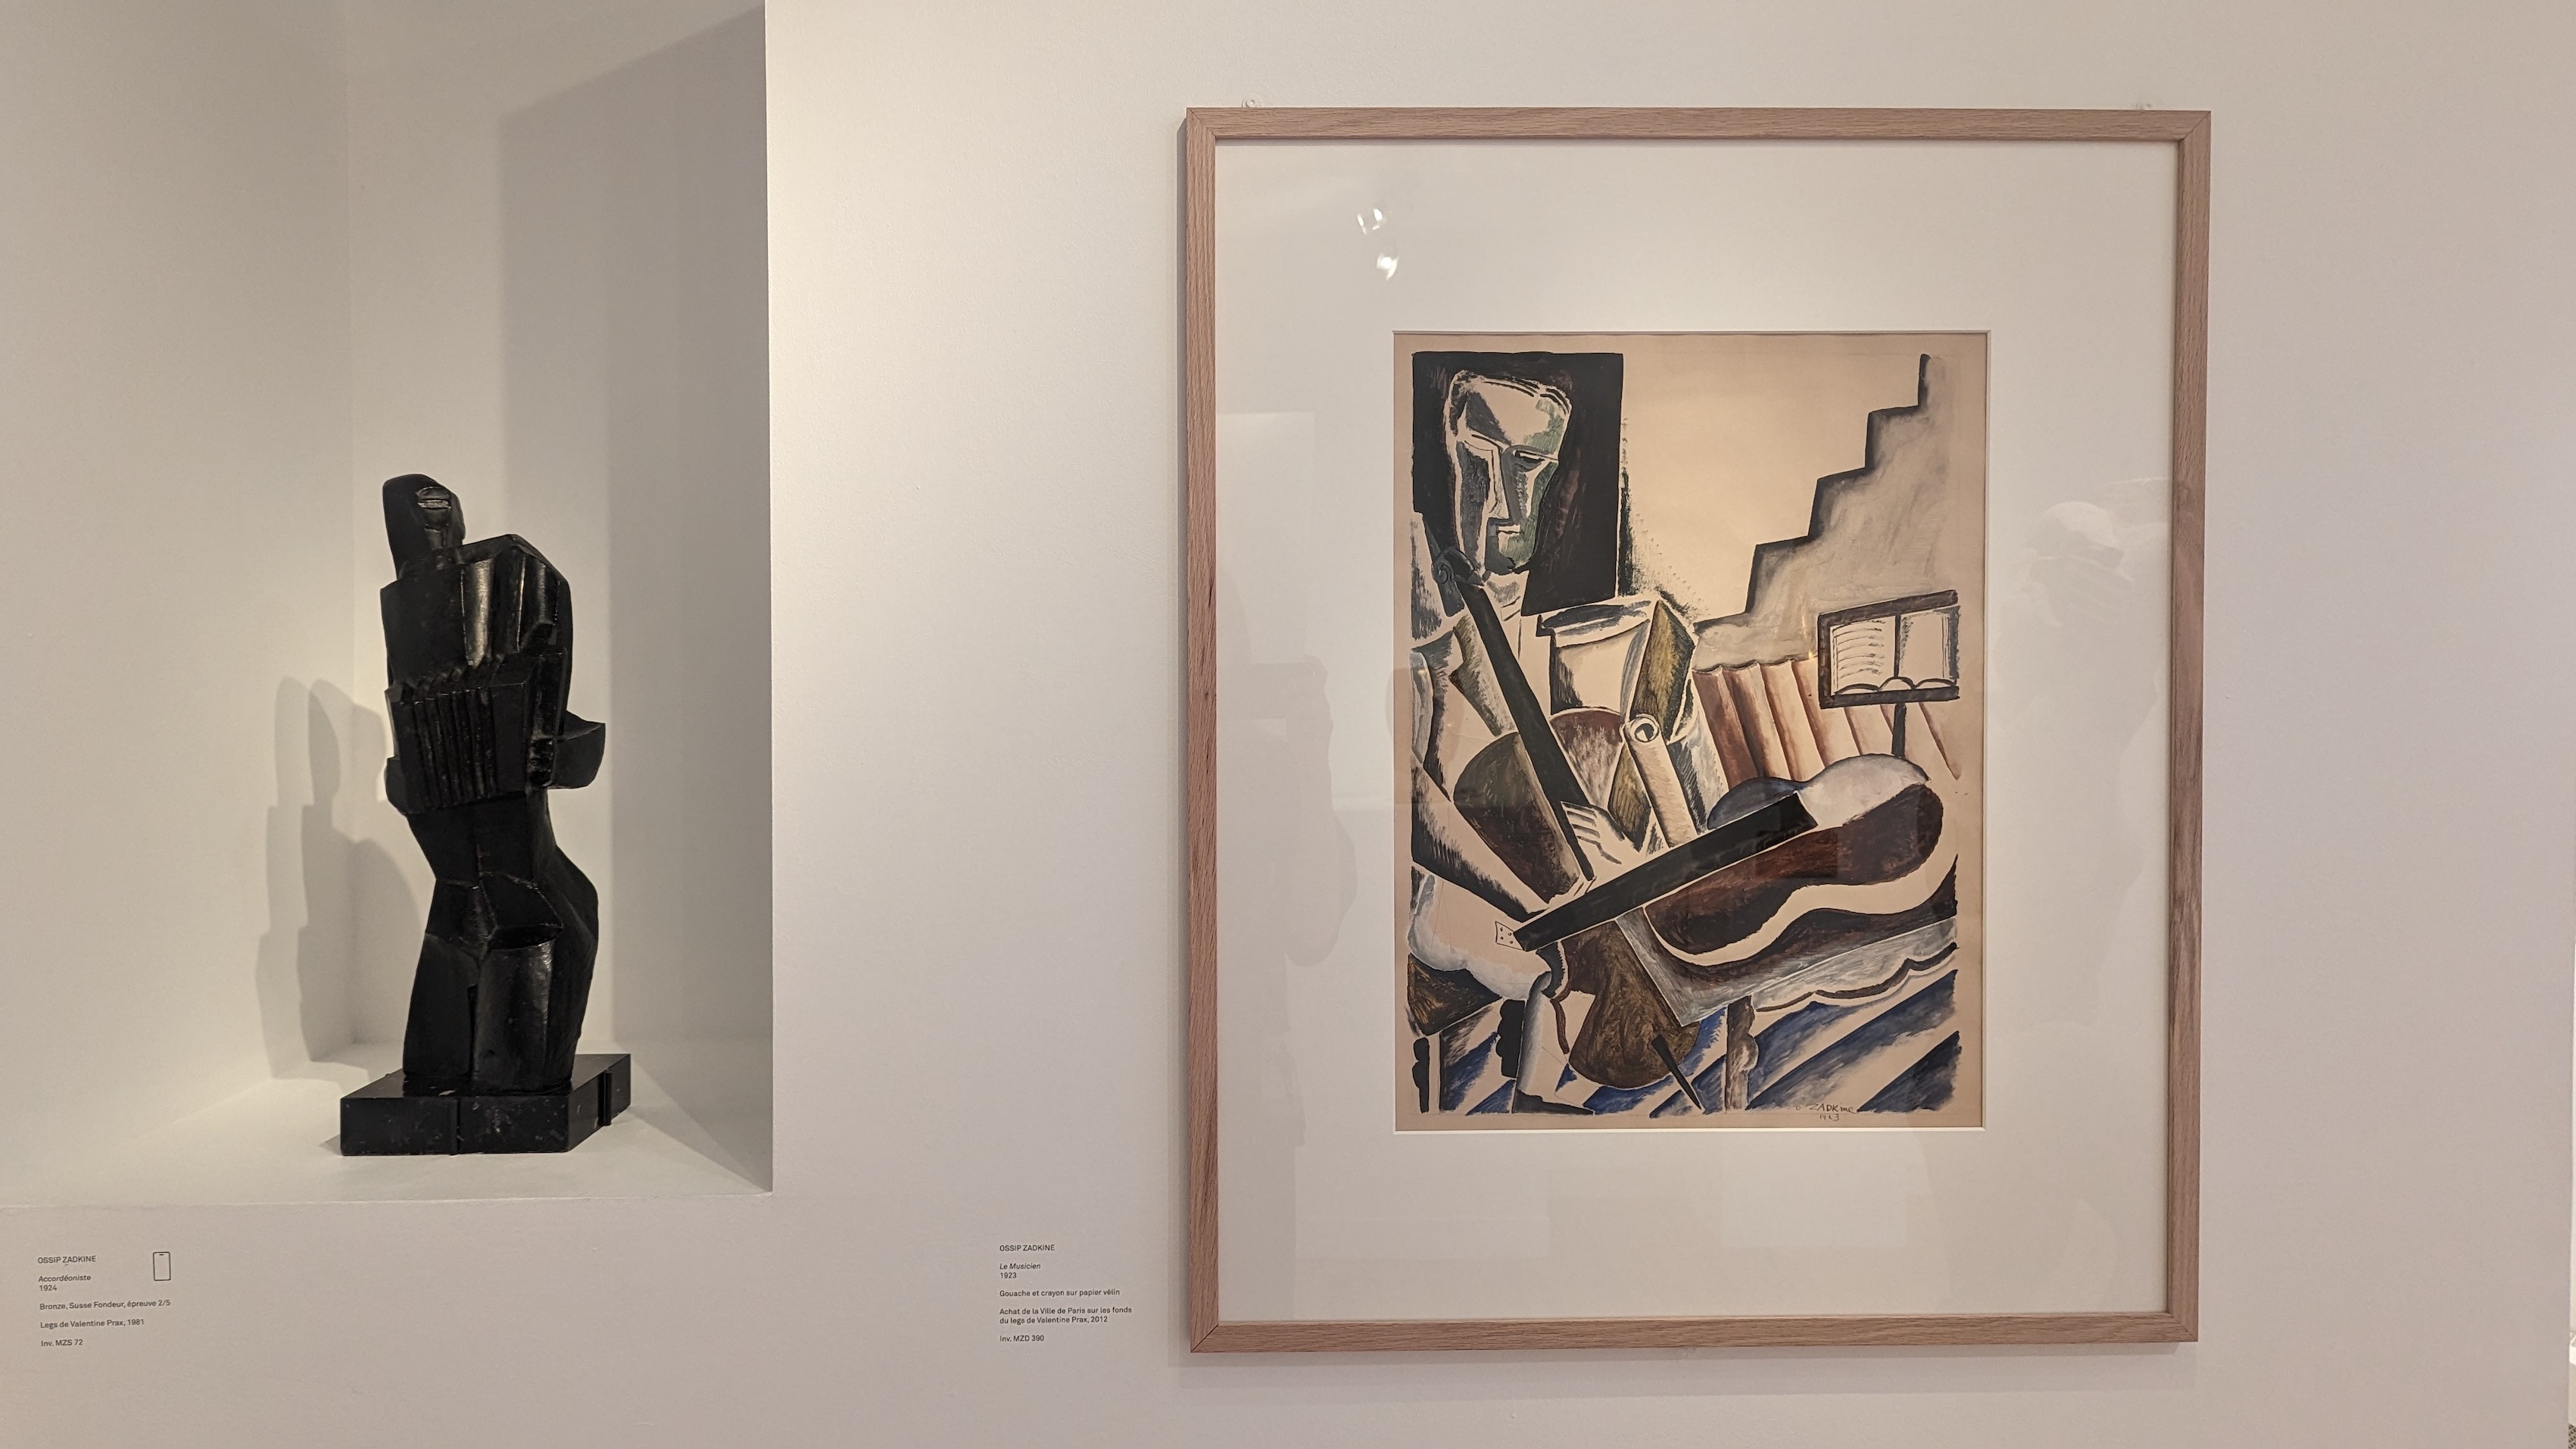 A sculpture and painting by Ossip Zadkine exhibited in the Zadkine Museum in Paris, which can be visited for free.